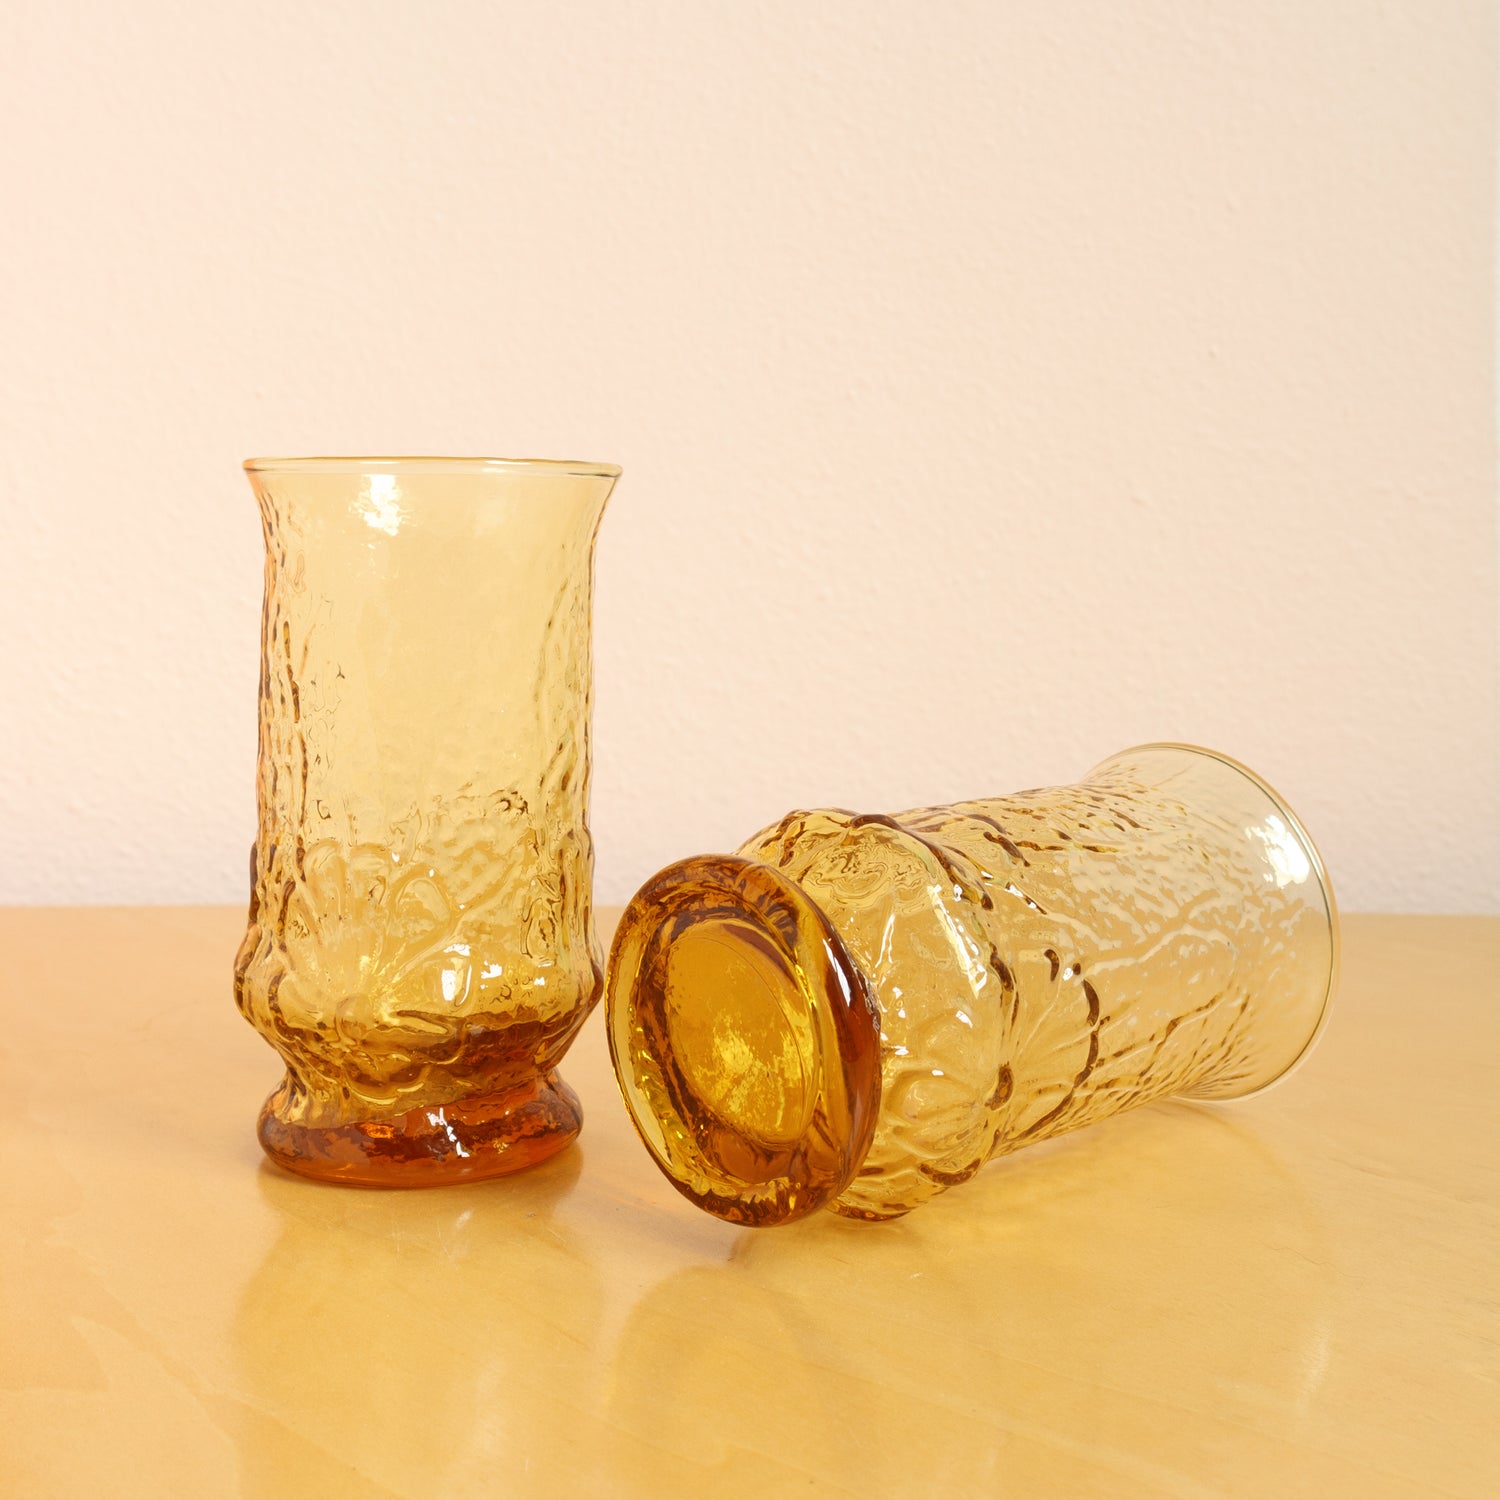 Vintage Glasses Tumblers Amber Yellow Gold Textured Bamboo Mid 